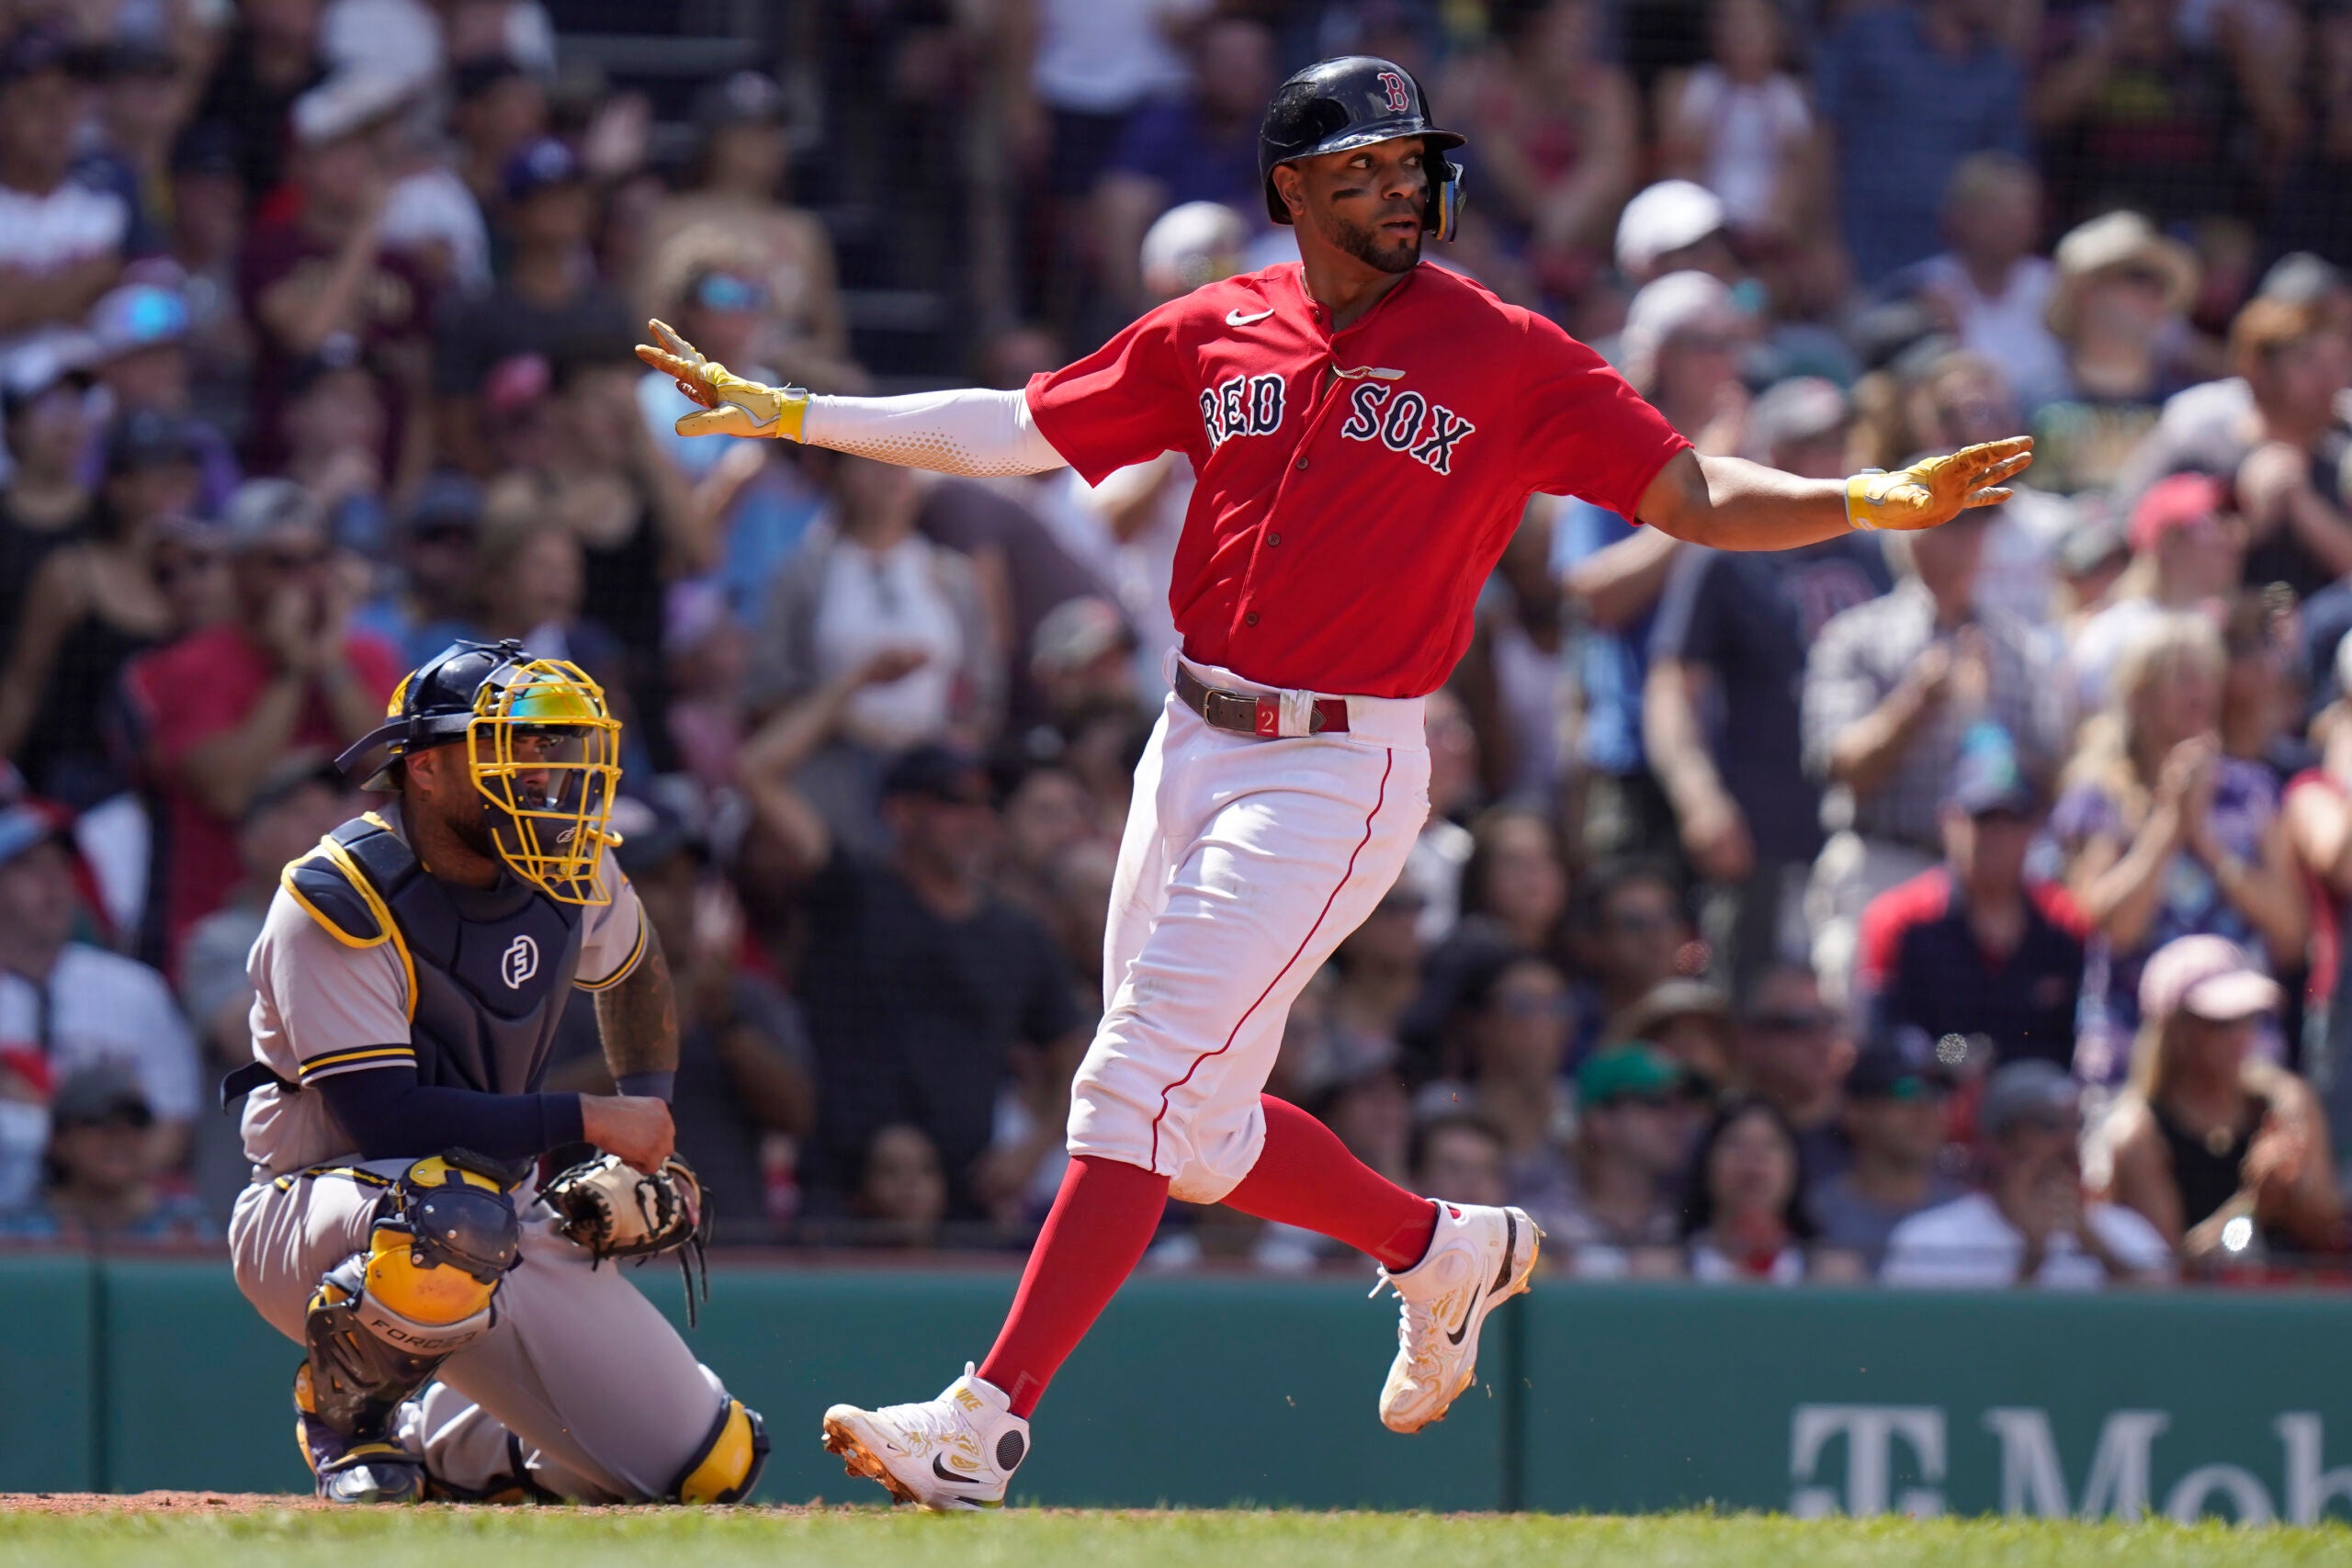 Pivotal sixth inning sinks Brewers in 5-3 loss to Red Sox - Brew Crew Ball